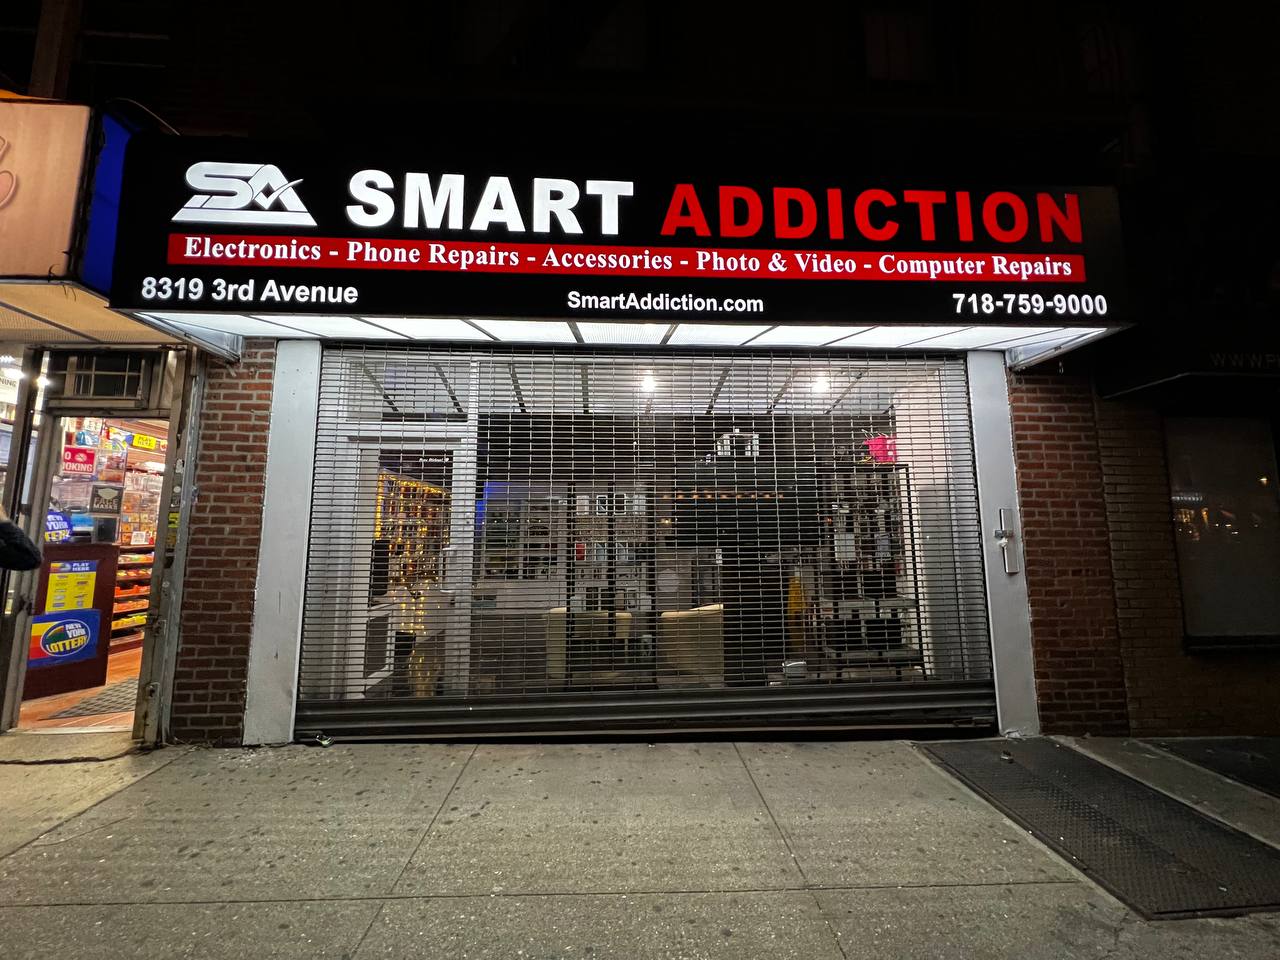 Smart Addiction - Revolutionary Mobile Phone Repair Shop & Computer Repair Service Opens in Brooklyn, Offering Unparalleled Services